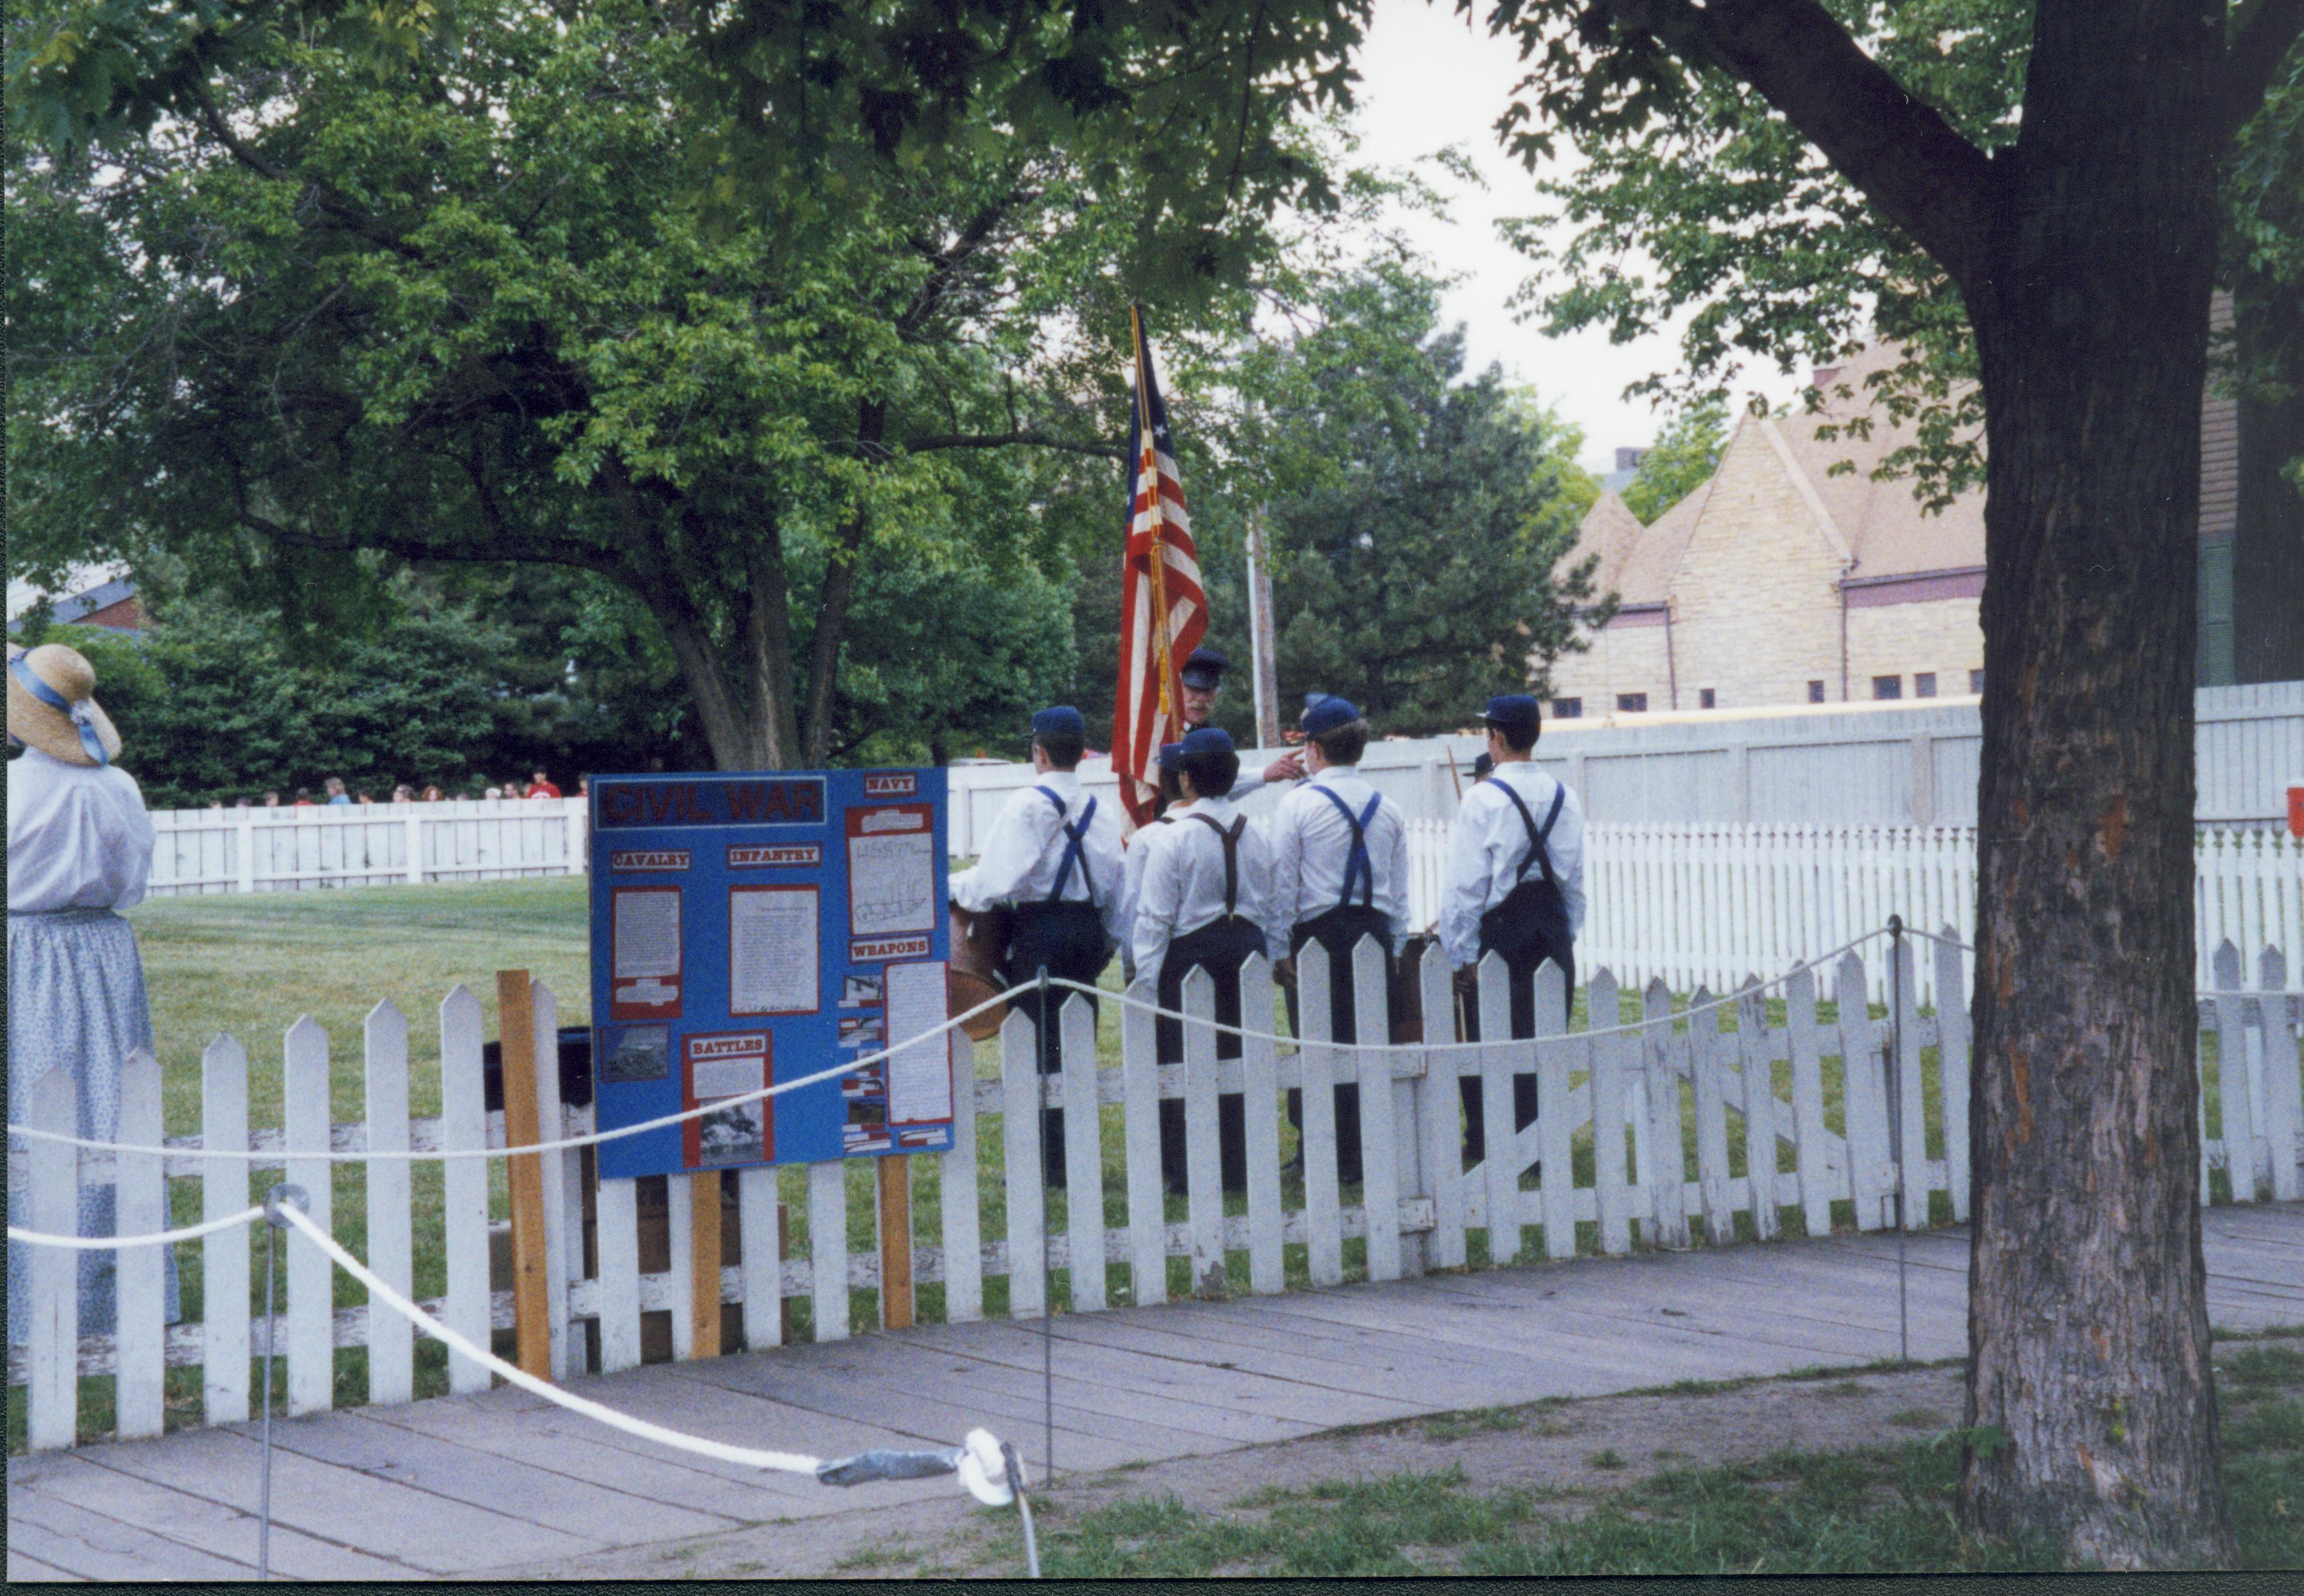 Iles School Living History Program - Students drilling in Civil War uniform in Burch Lot (Block 7, Lot 9). Mentor giving orders while holding US flag. Teacher/chaperone stands on left behind fence. School groups walk along alley in background left near Visitor Center. Grace Lutheran Church in background right.  Looking Northwest from 8th Street. Iles School, living history, Burch, Civil War, soldiers, Grace Lutheran Church, students, school groups 